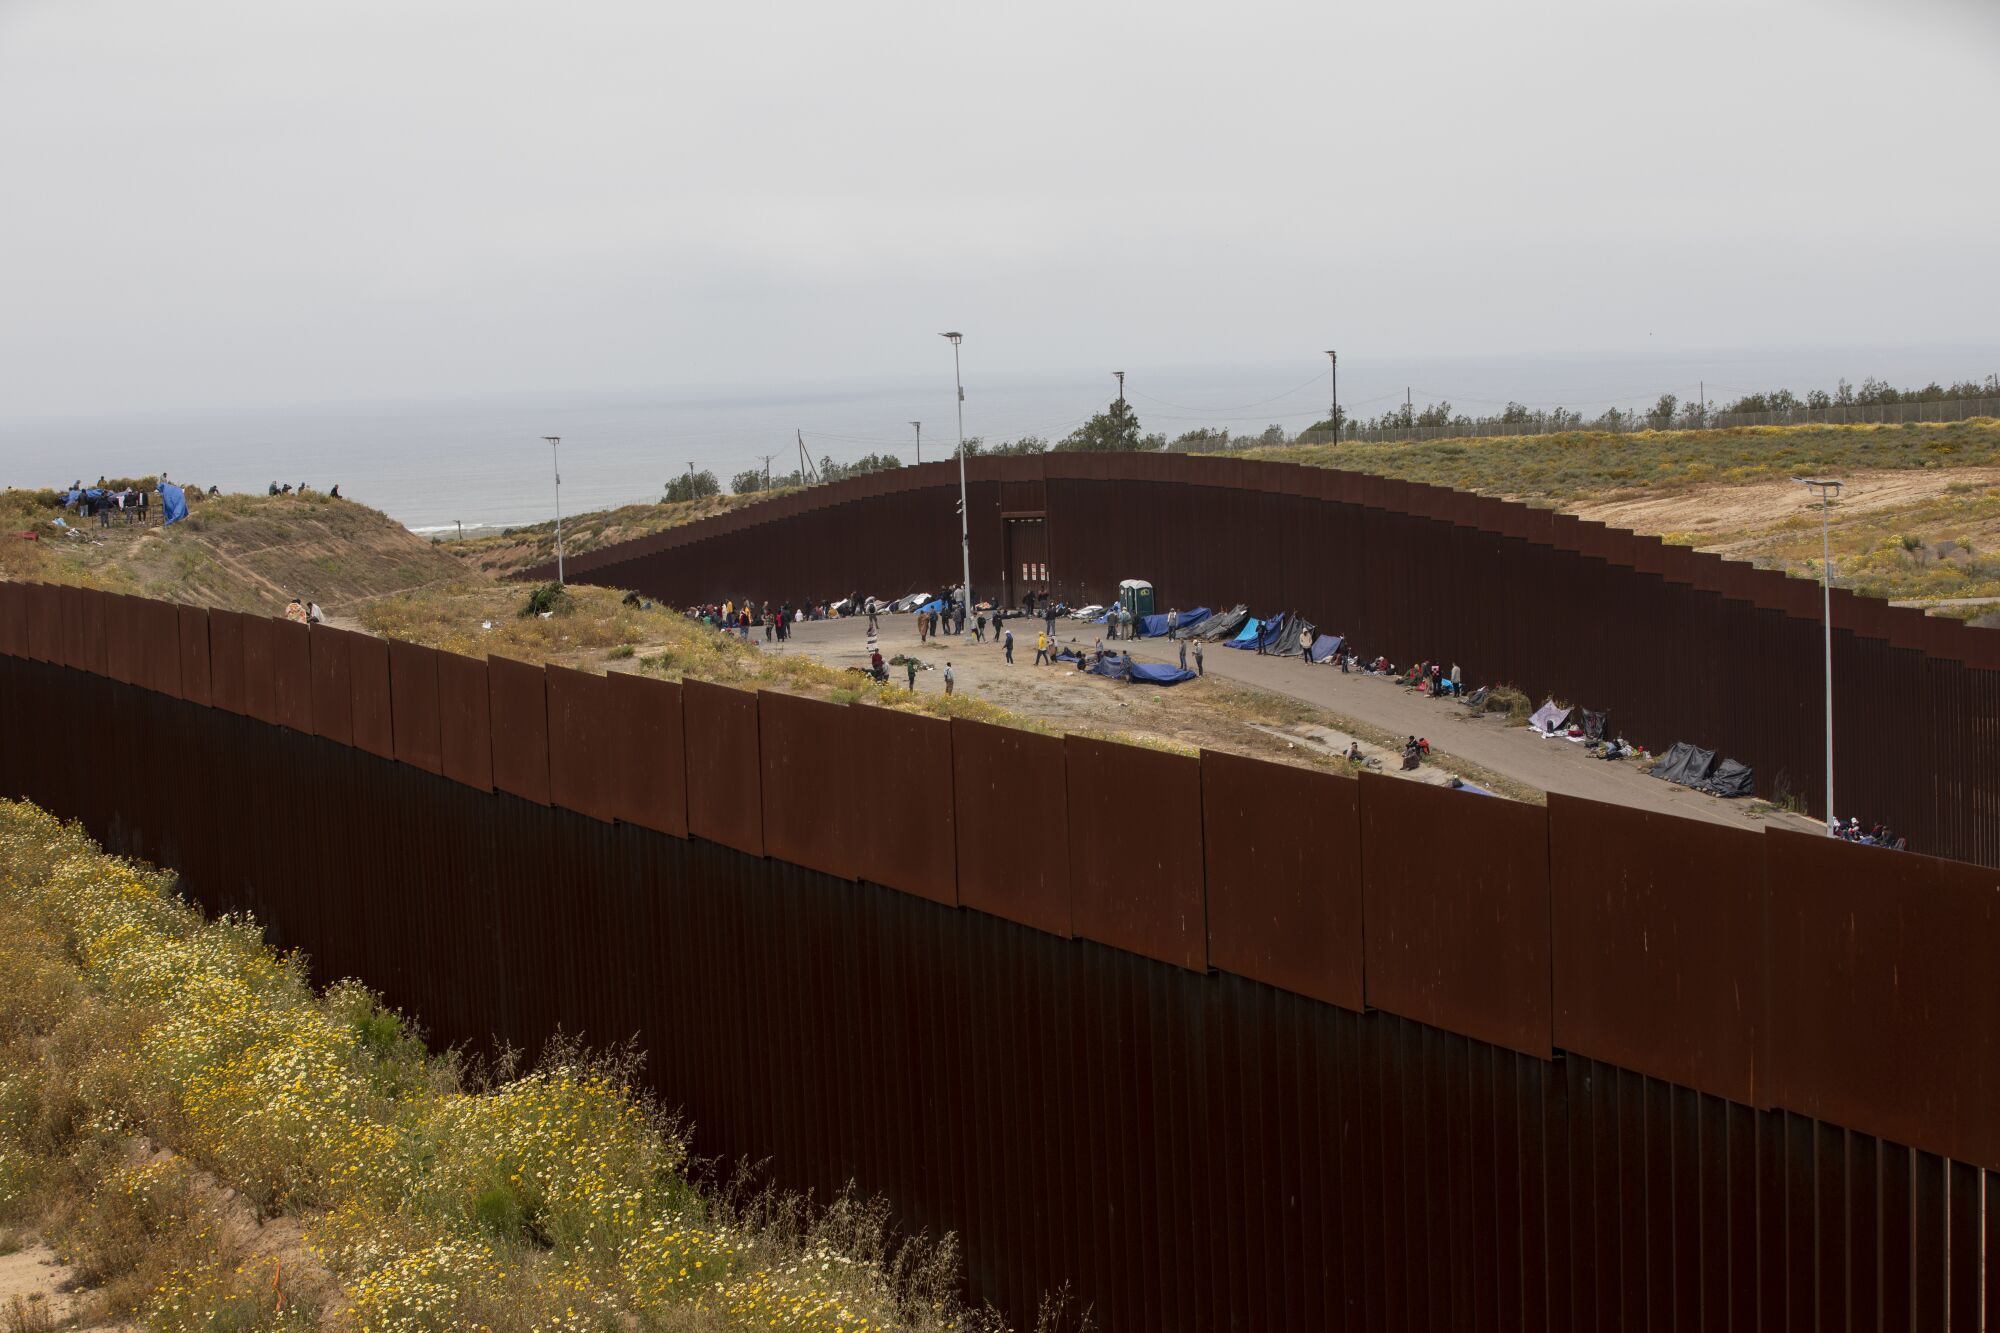 A group of about 500-800 men traveling without their families wait between the border walls  the day after Title 42 ended.